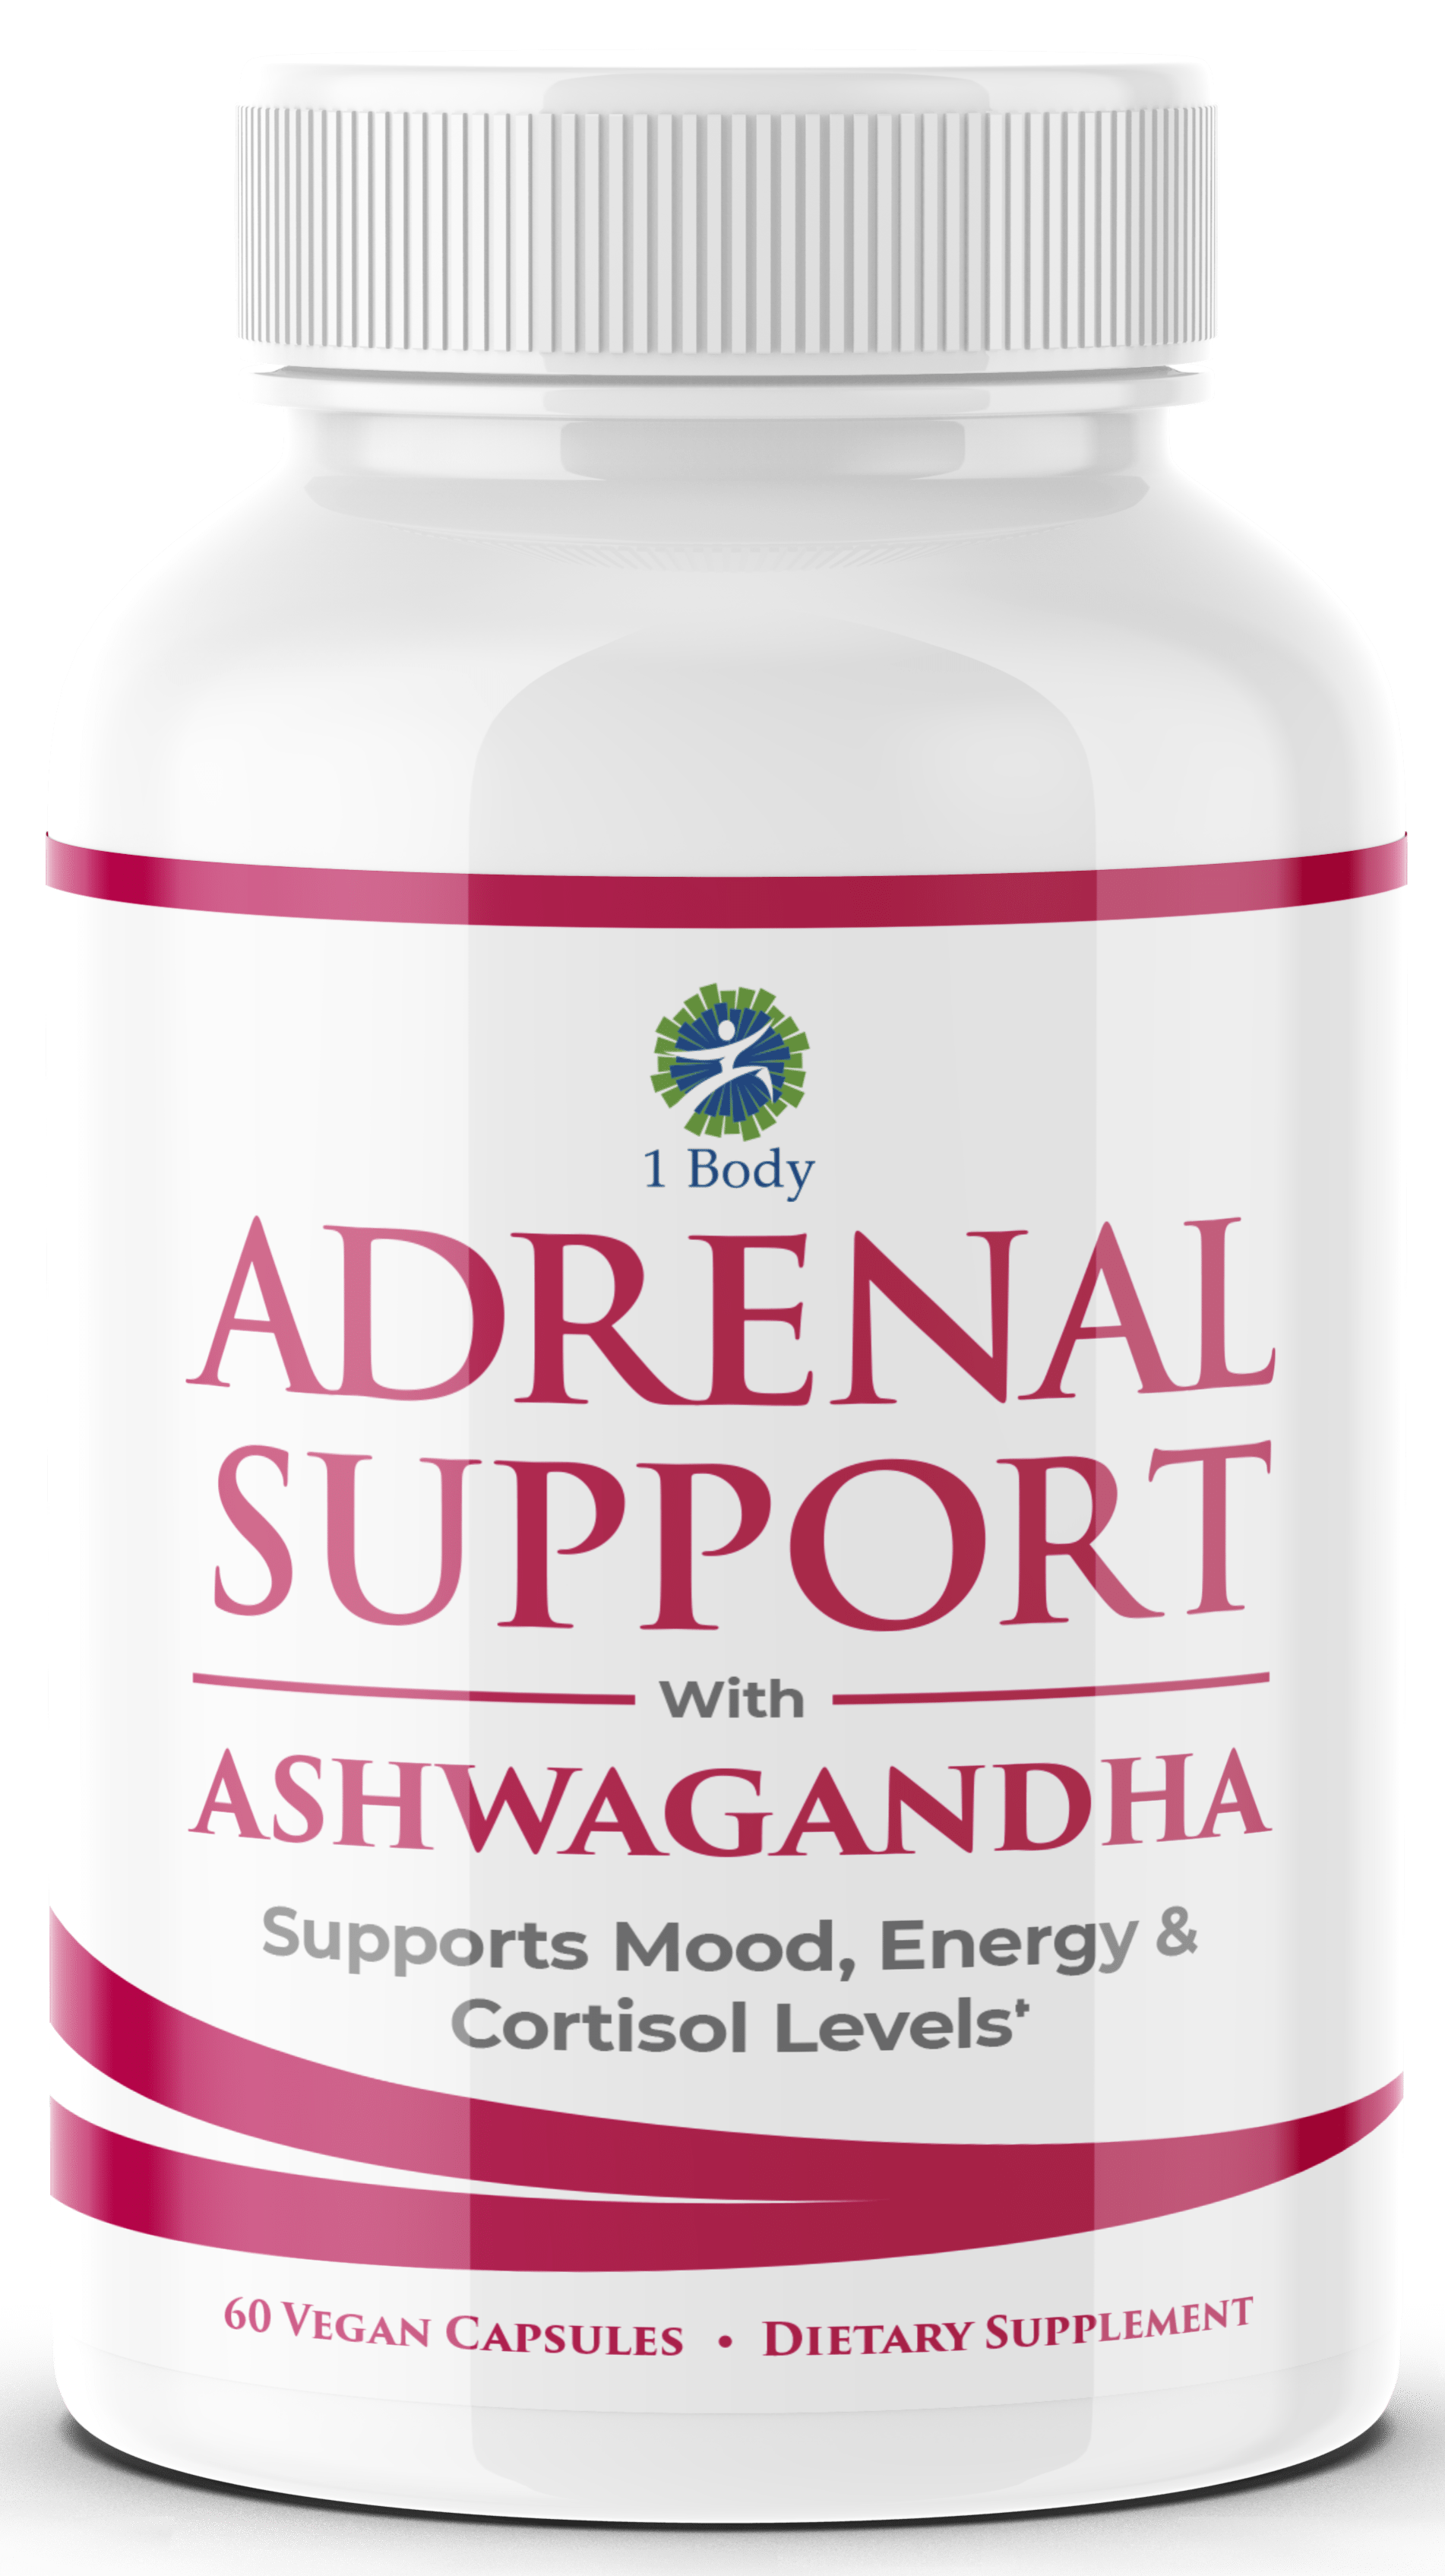 1 Body Adrenal Support